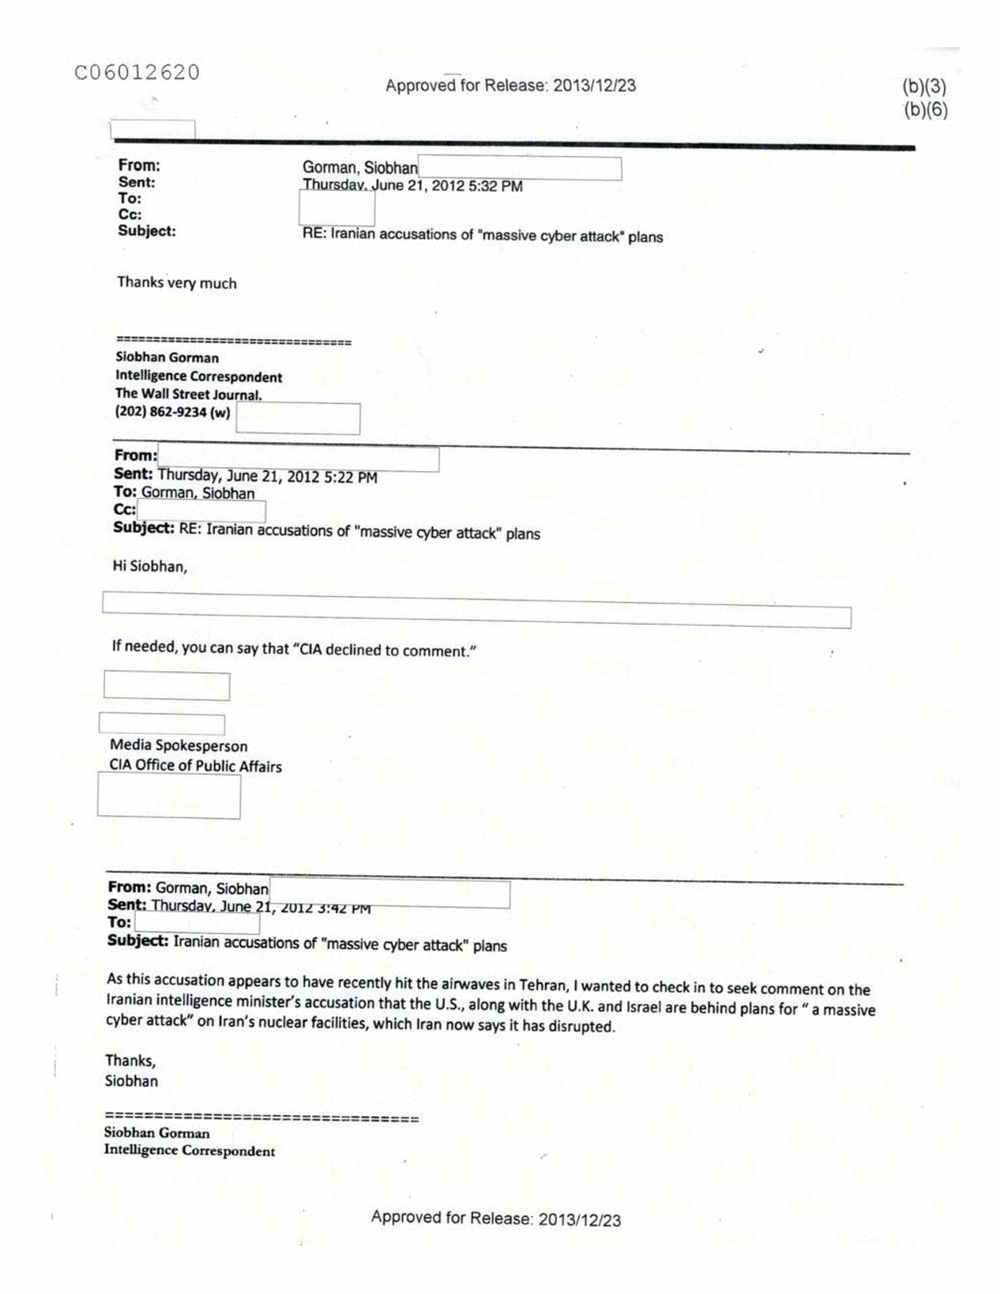 Page 169 from Email Correspondence Between Reporters and CIA Flacks